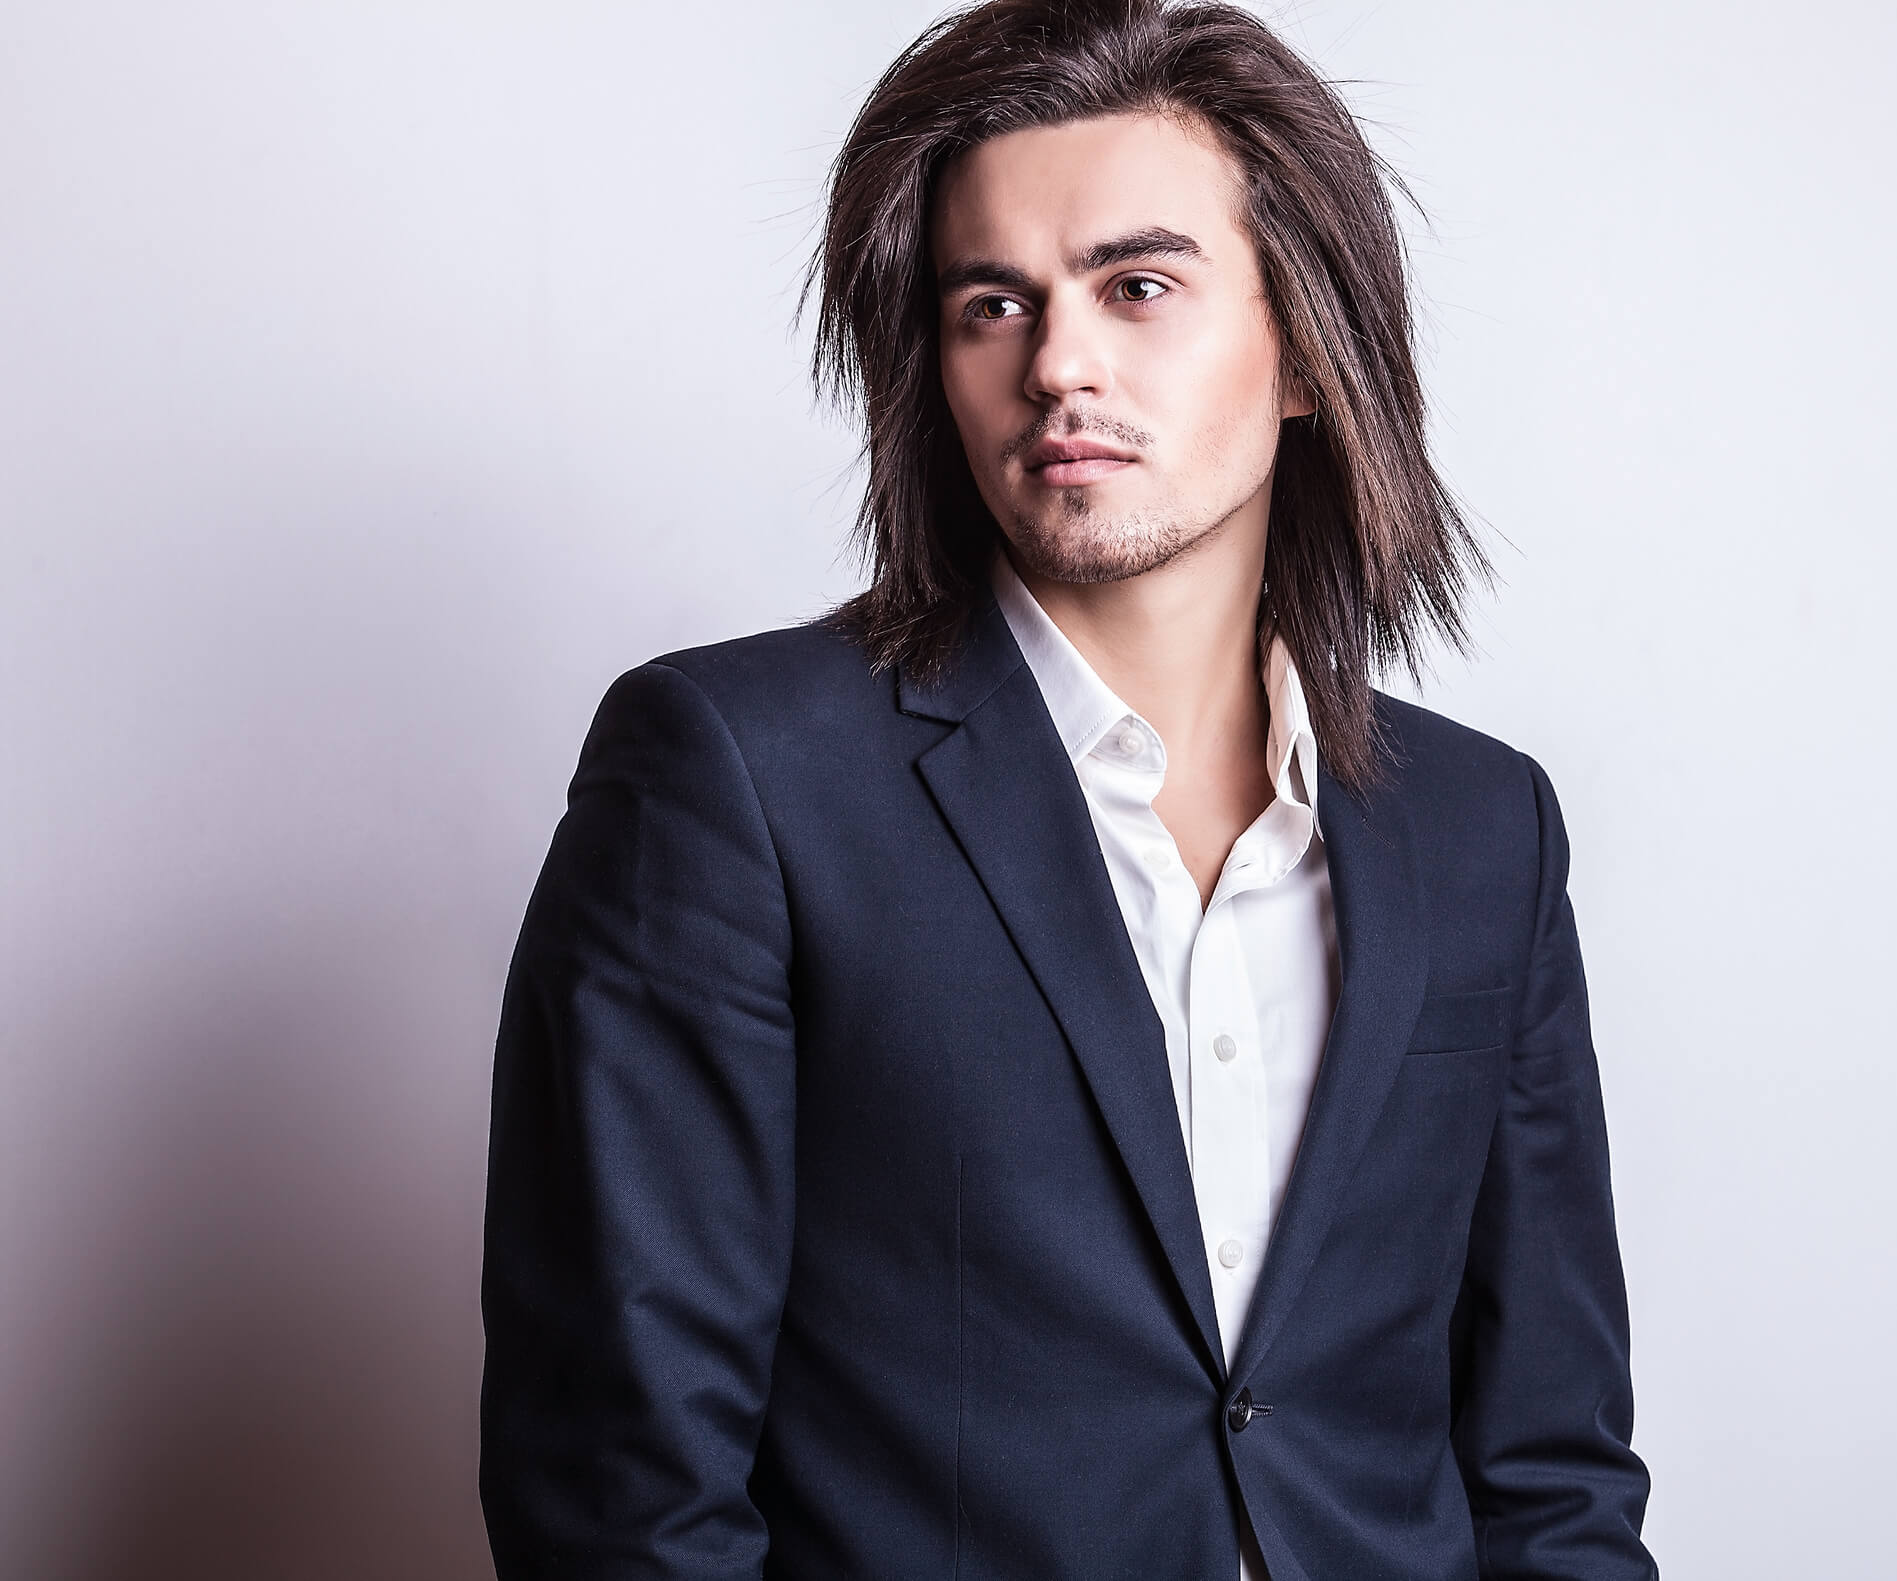 Image of an elegant young handsome man with long hair